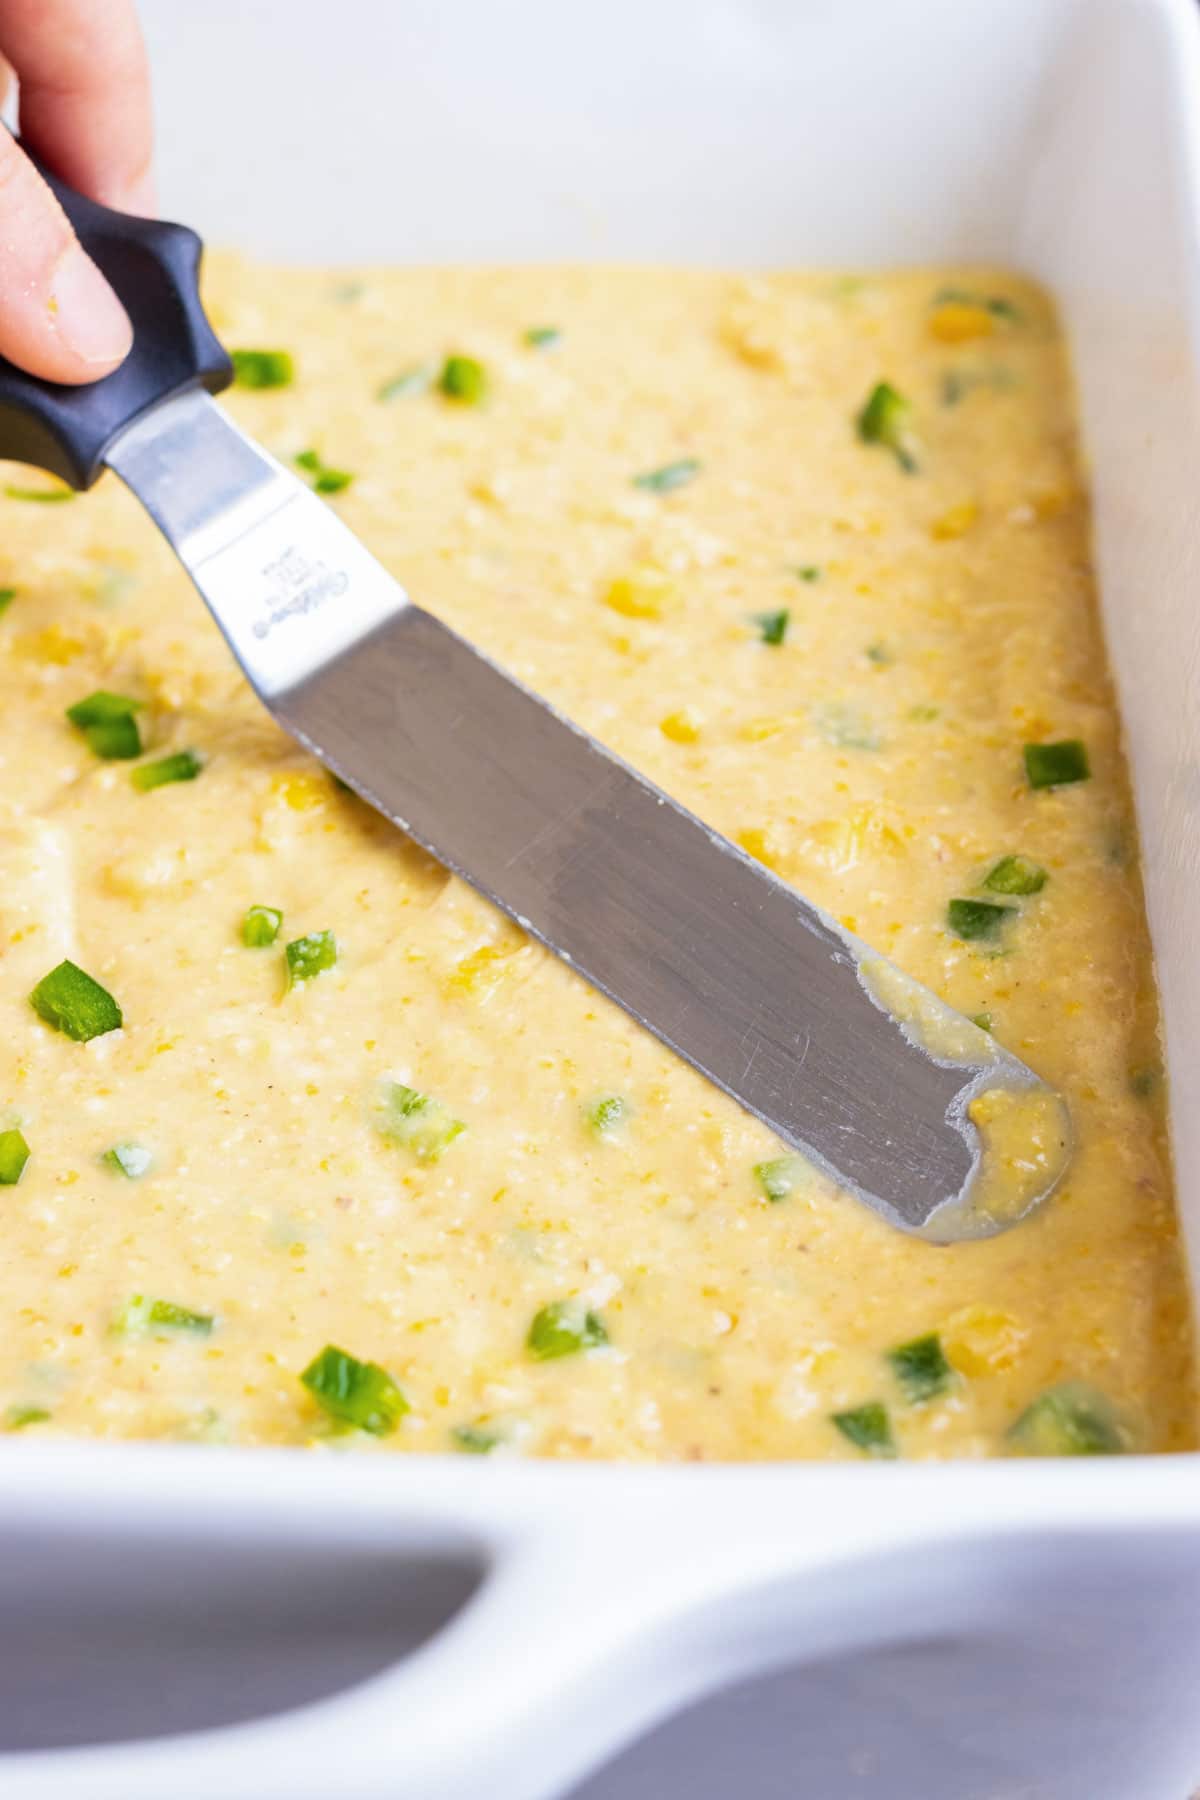 Spreading out a jalapeño cornbread batter into a large baking dish before cooking in oven.